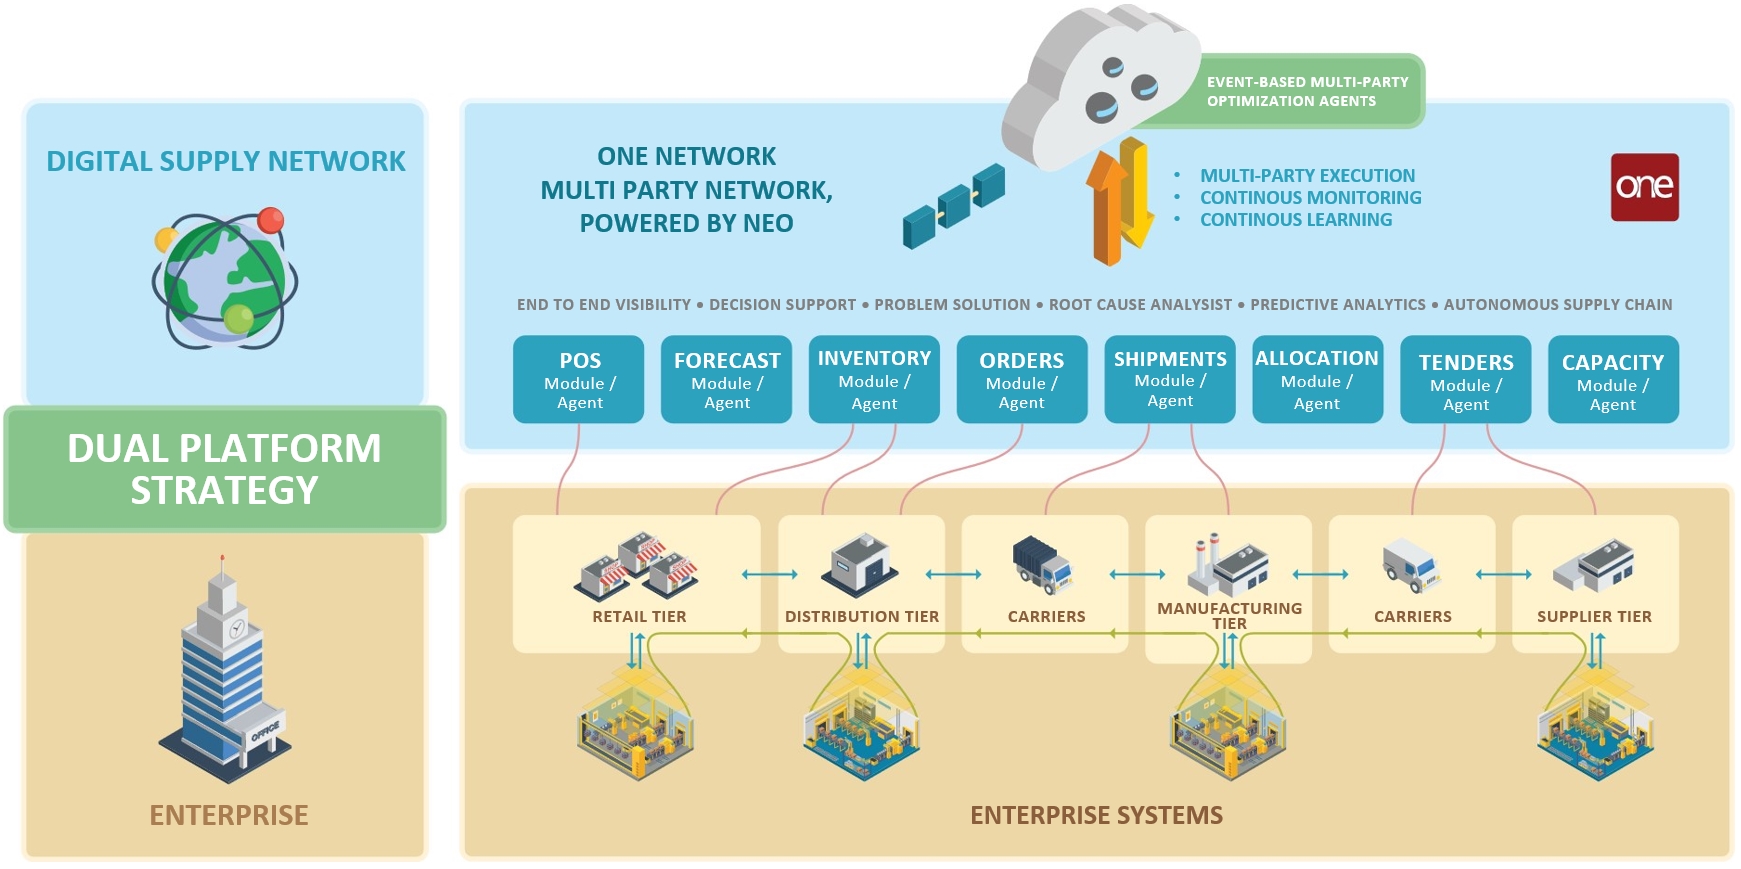 Dual Platform Strategy: Integrating ERP, WMS, TMS, YMS, Legacy Systems into a Digital Supply Chain Network